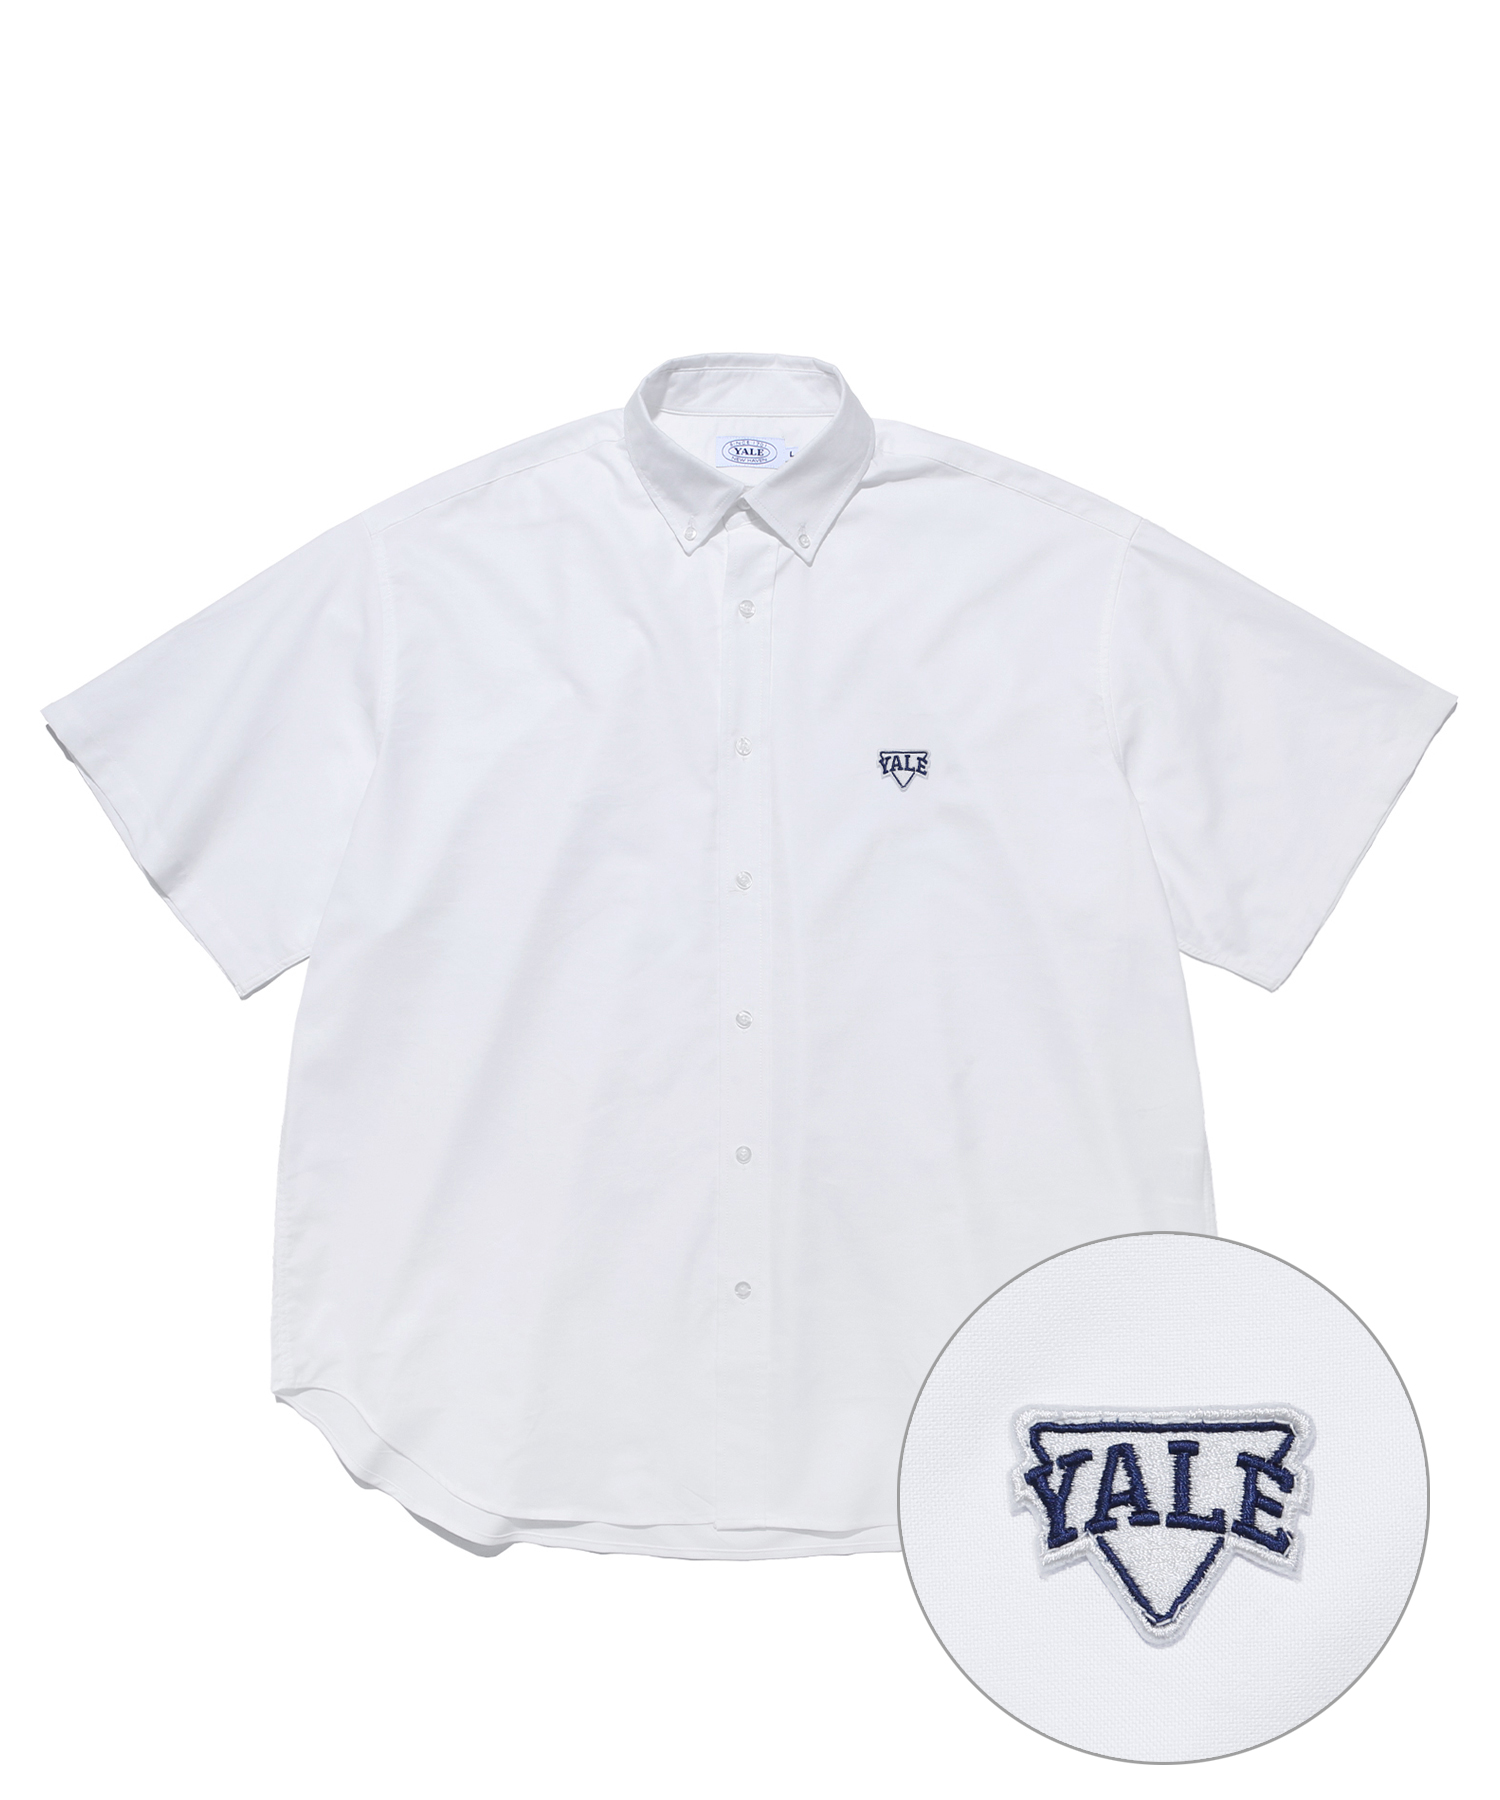 (THE BIG) YALE WAPPEN OXFORD SS SHIRT WHITE